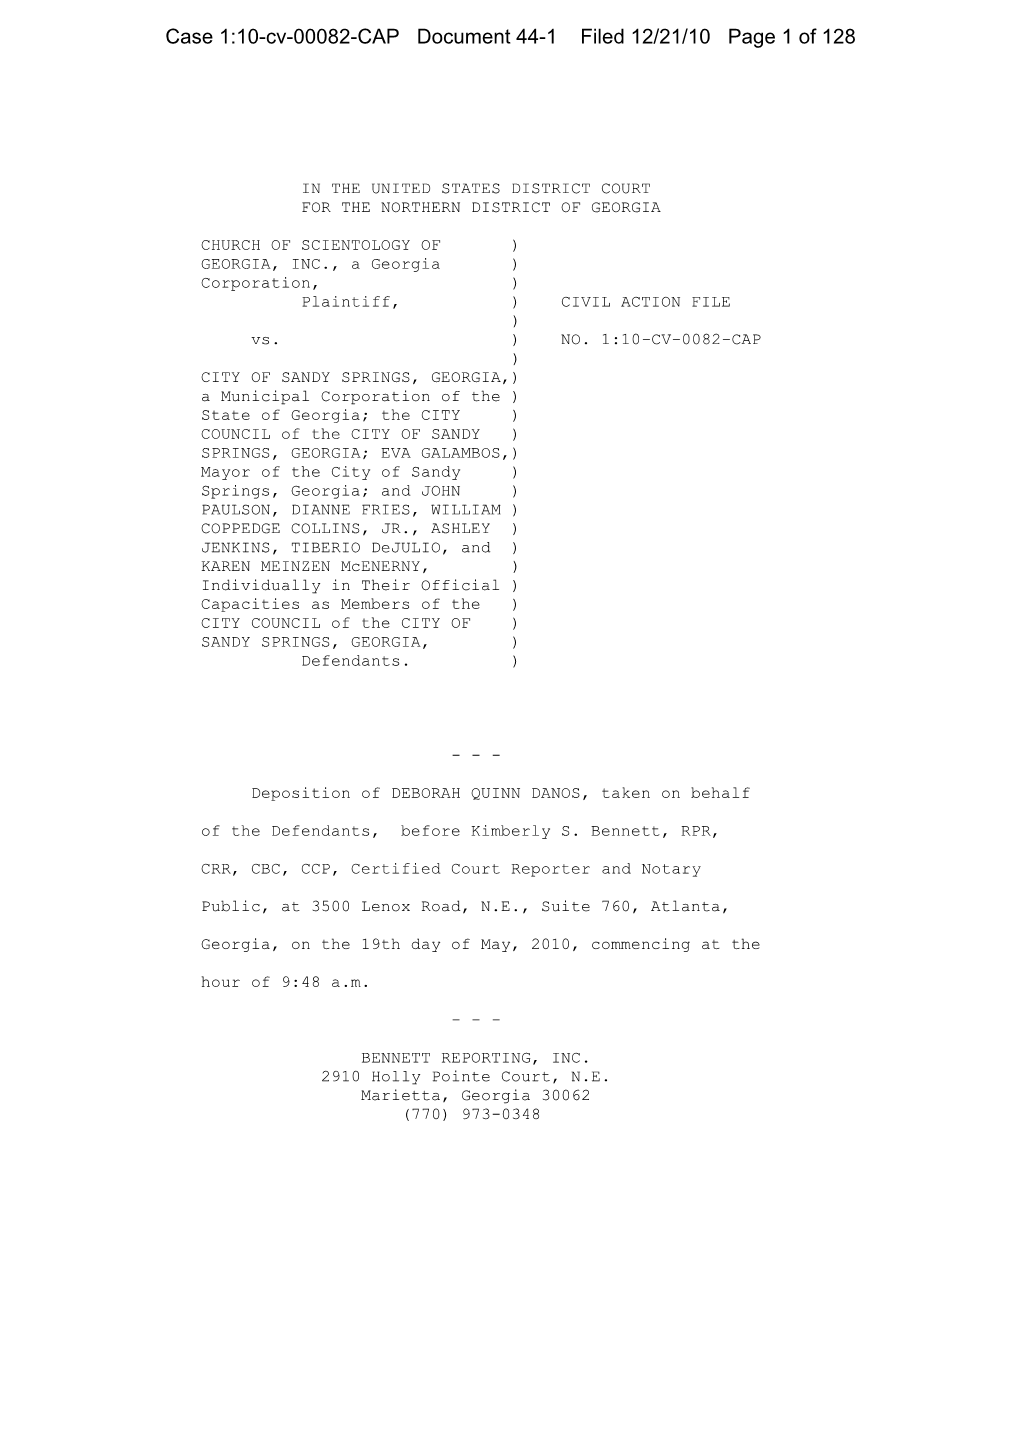 Case 1:10-Cv-00082-CAP Document 44-1 Filed 12/21/10 Page 1 of 128